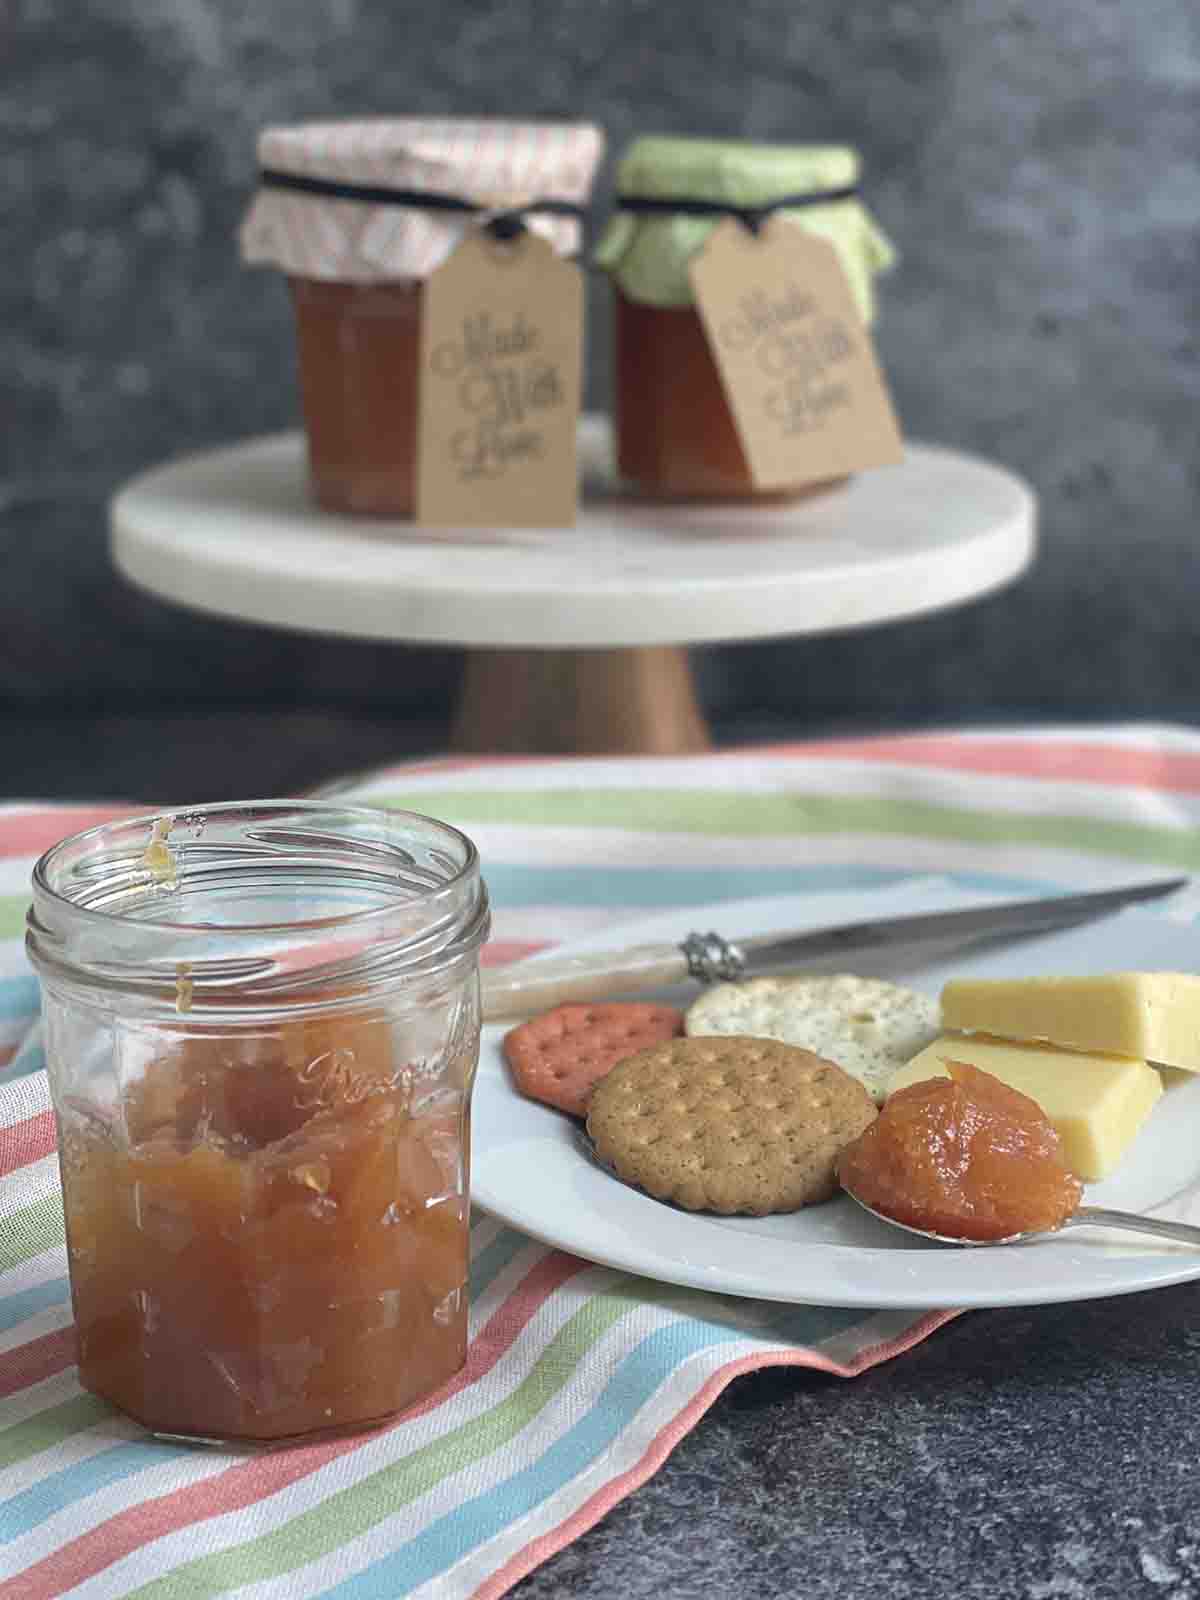 quince cheese with cheese and biscuits.